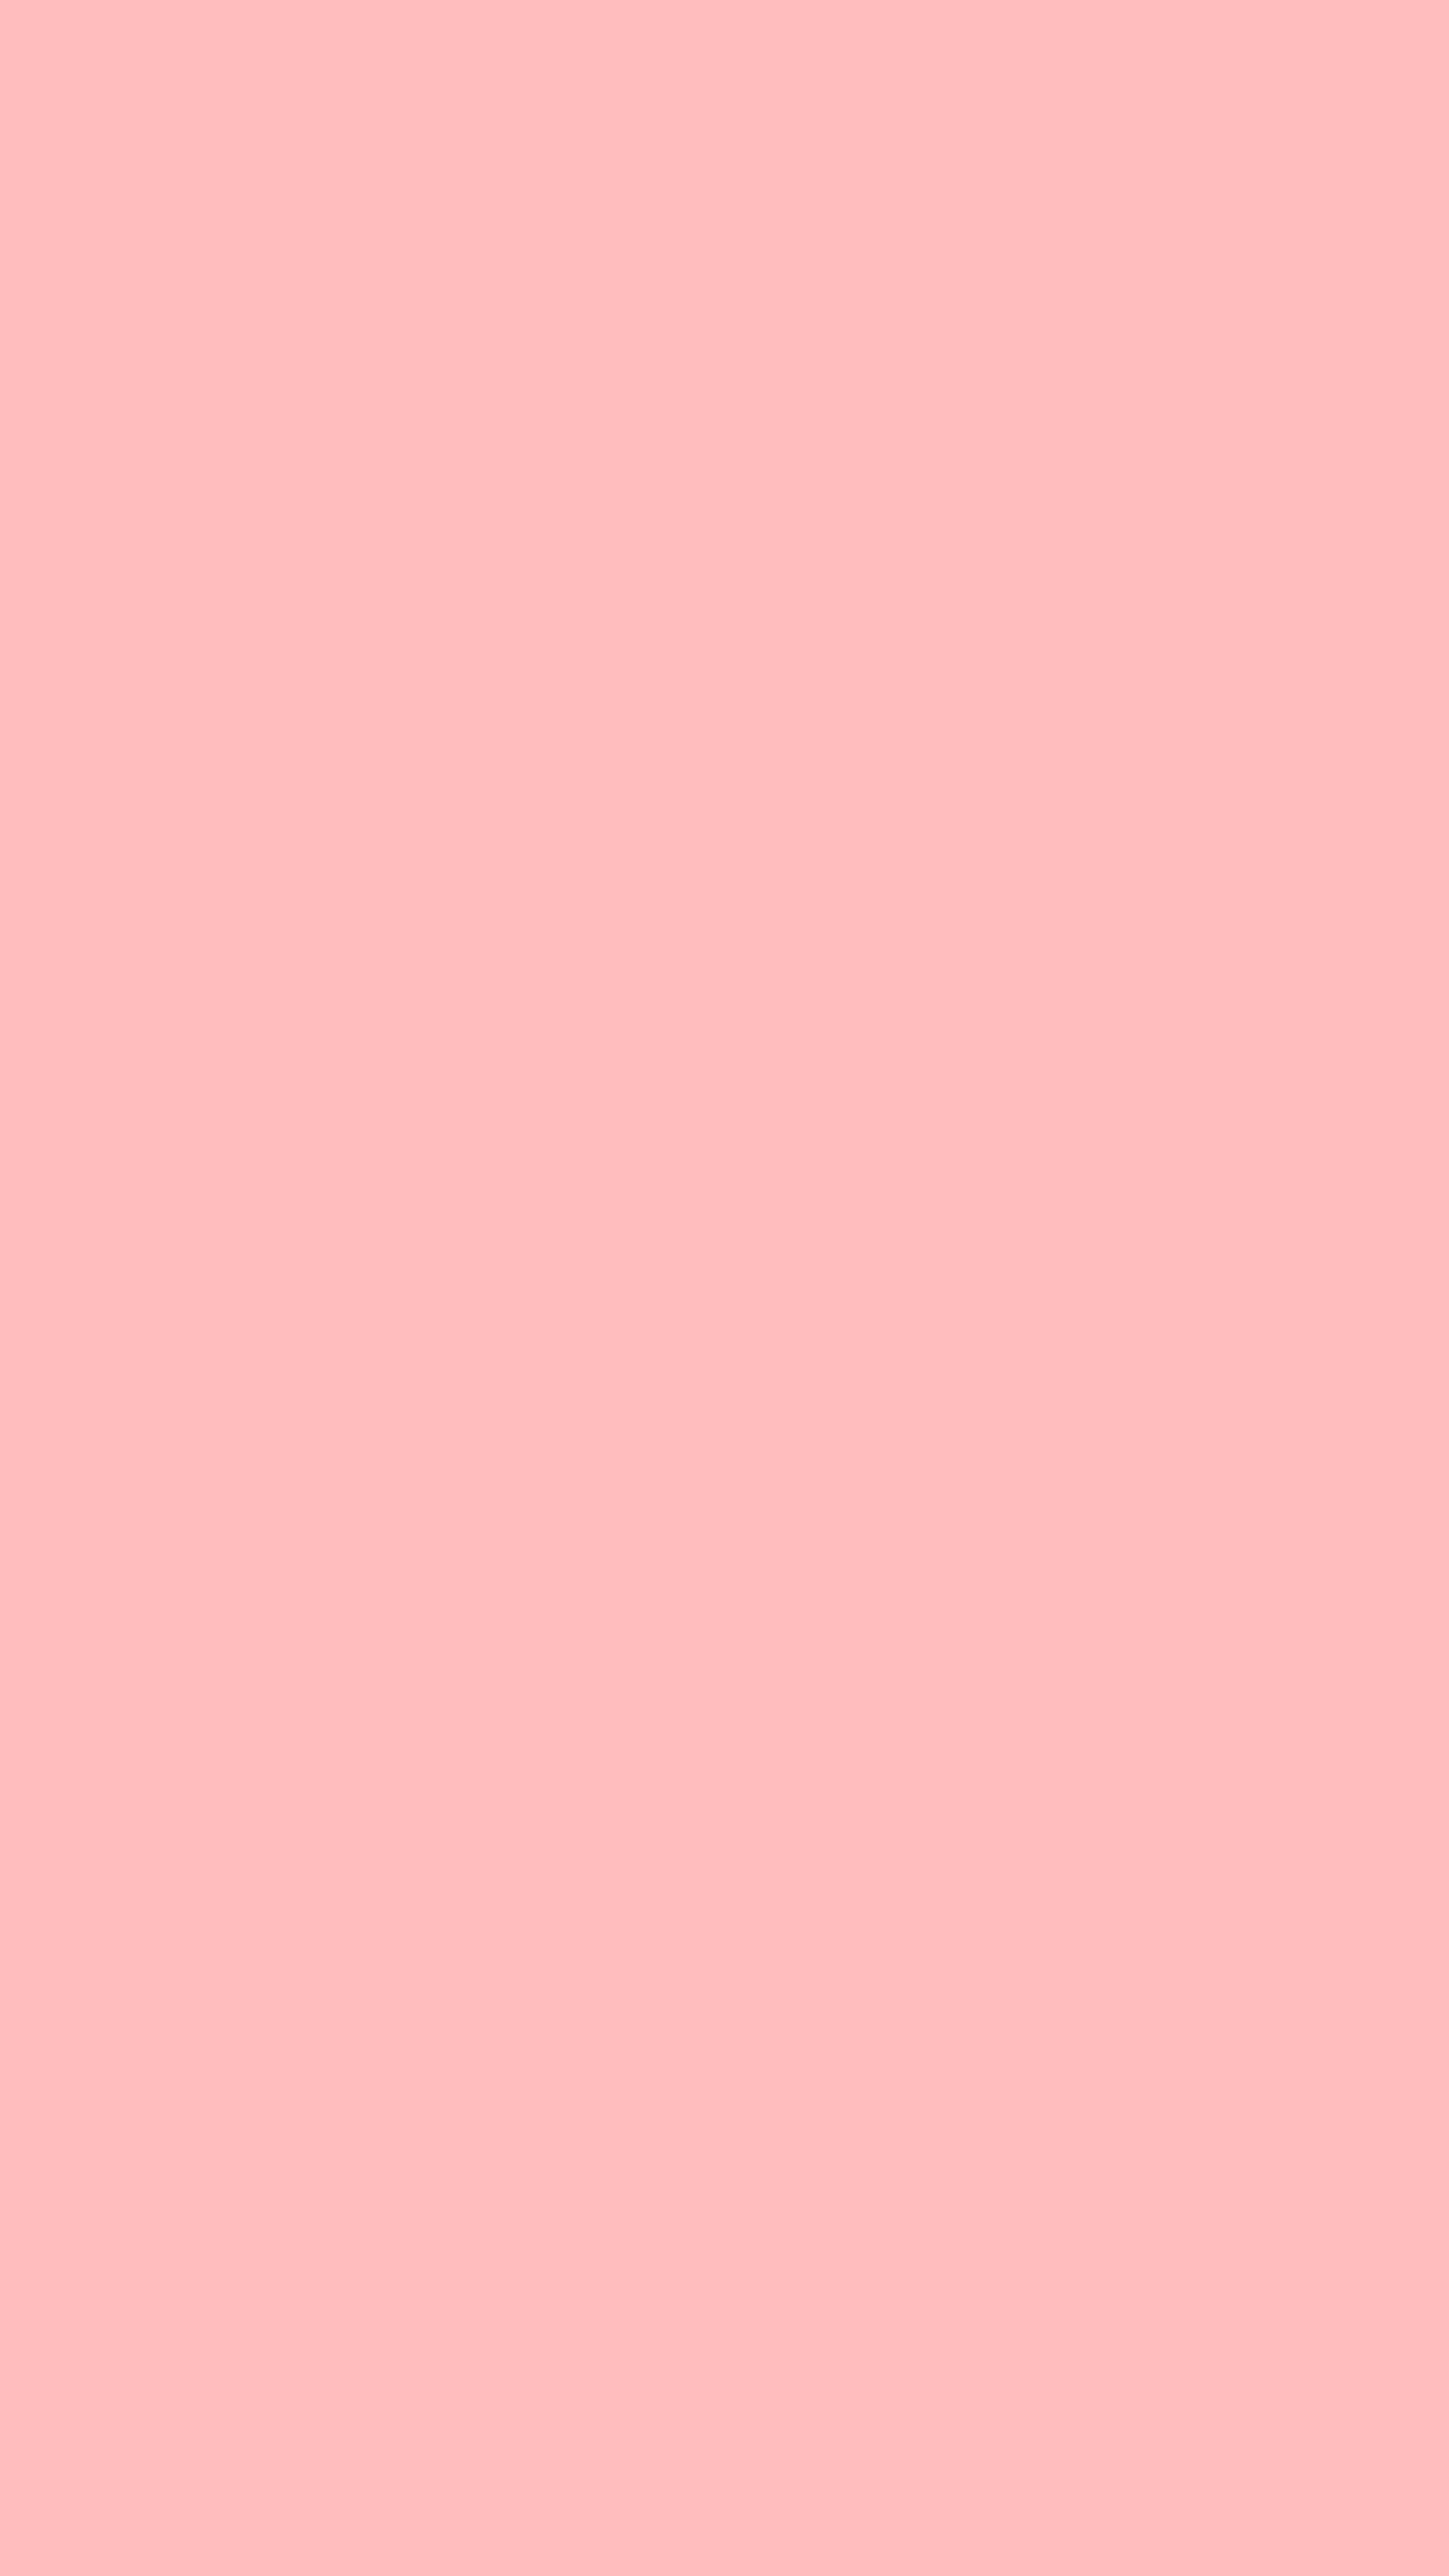 Pretty Pink Plain Color Background壁紙[ae2a355c08f645d5a3f9]